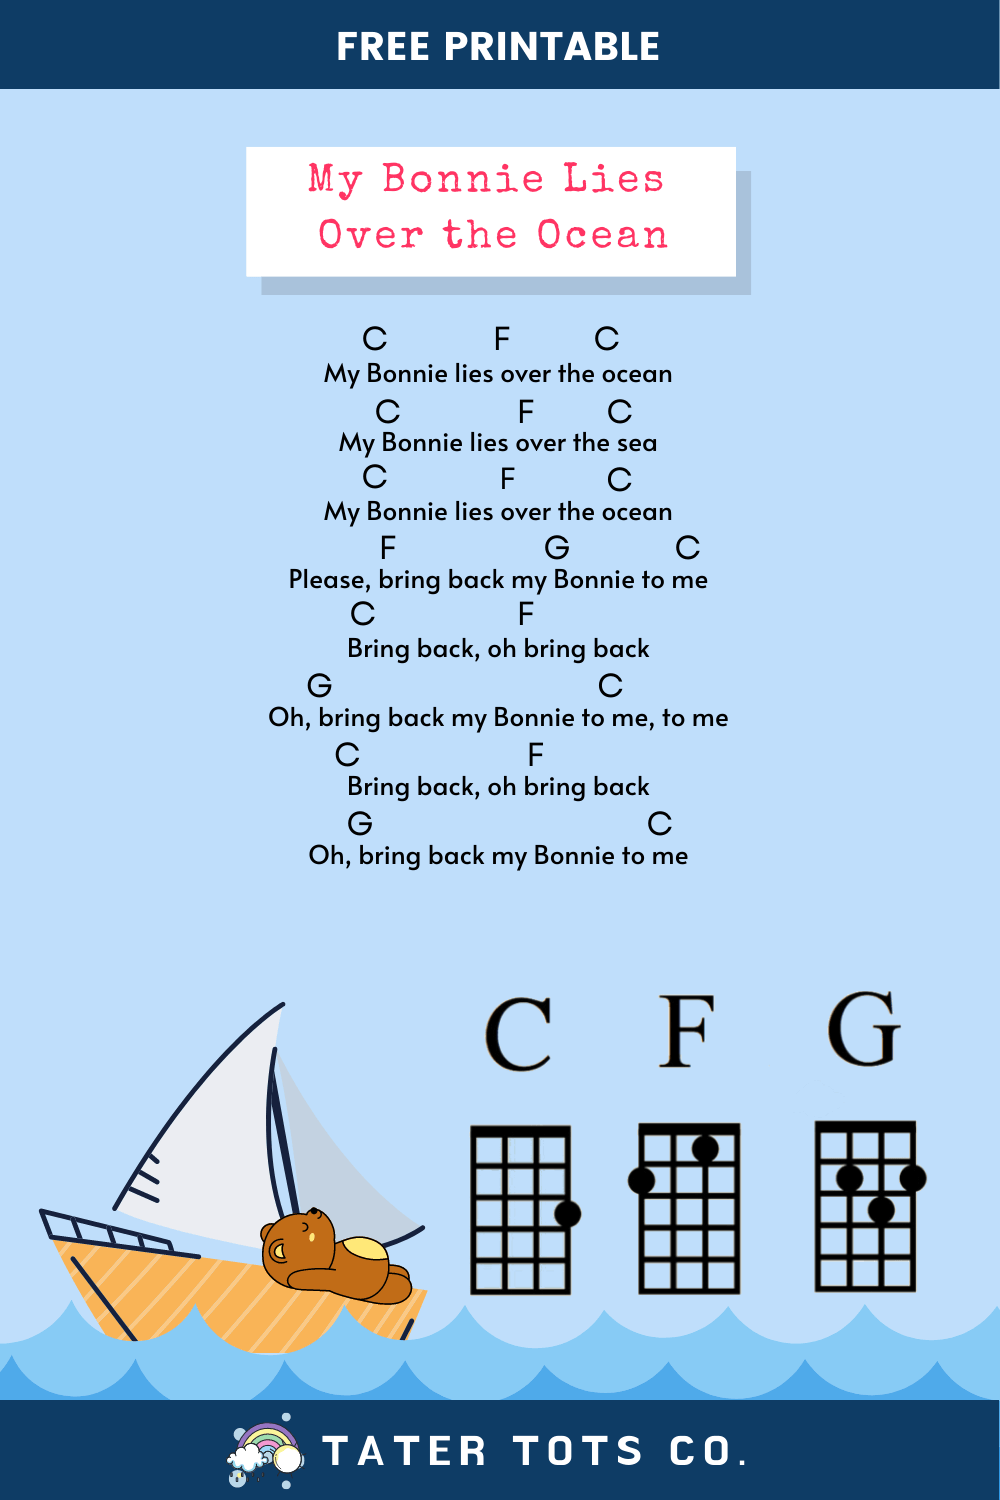 My Bonnie Lies Over the Ocean: Download the PDF printable version here